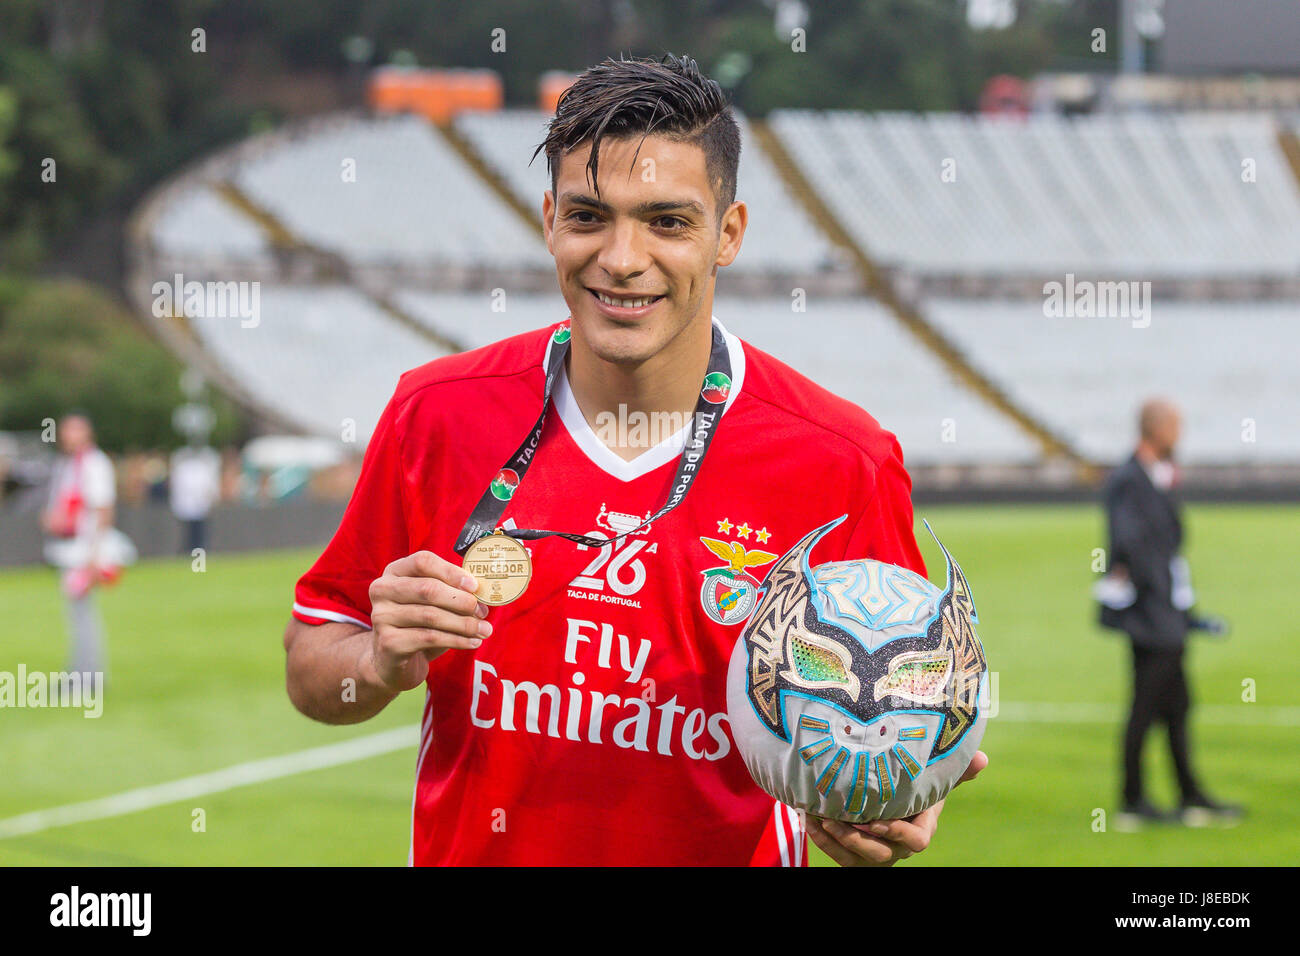 Lisbon, Portugal. 28th May, 2017. May 28, 2017. Lisbon, Portugal. BenficaÕs forward from Mexico Raul Jimenez (9) holding the Portuguese Cup winners medal during the game SL Benfica v Vitoria SC Credit: Alexandre de Sousa/Alamy Live News Stock Photo